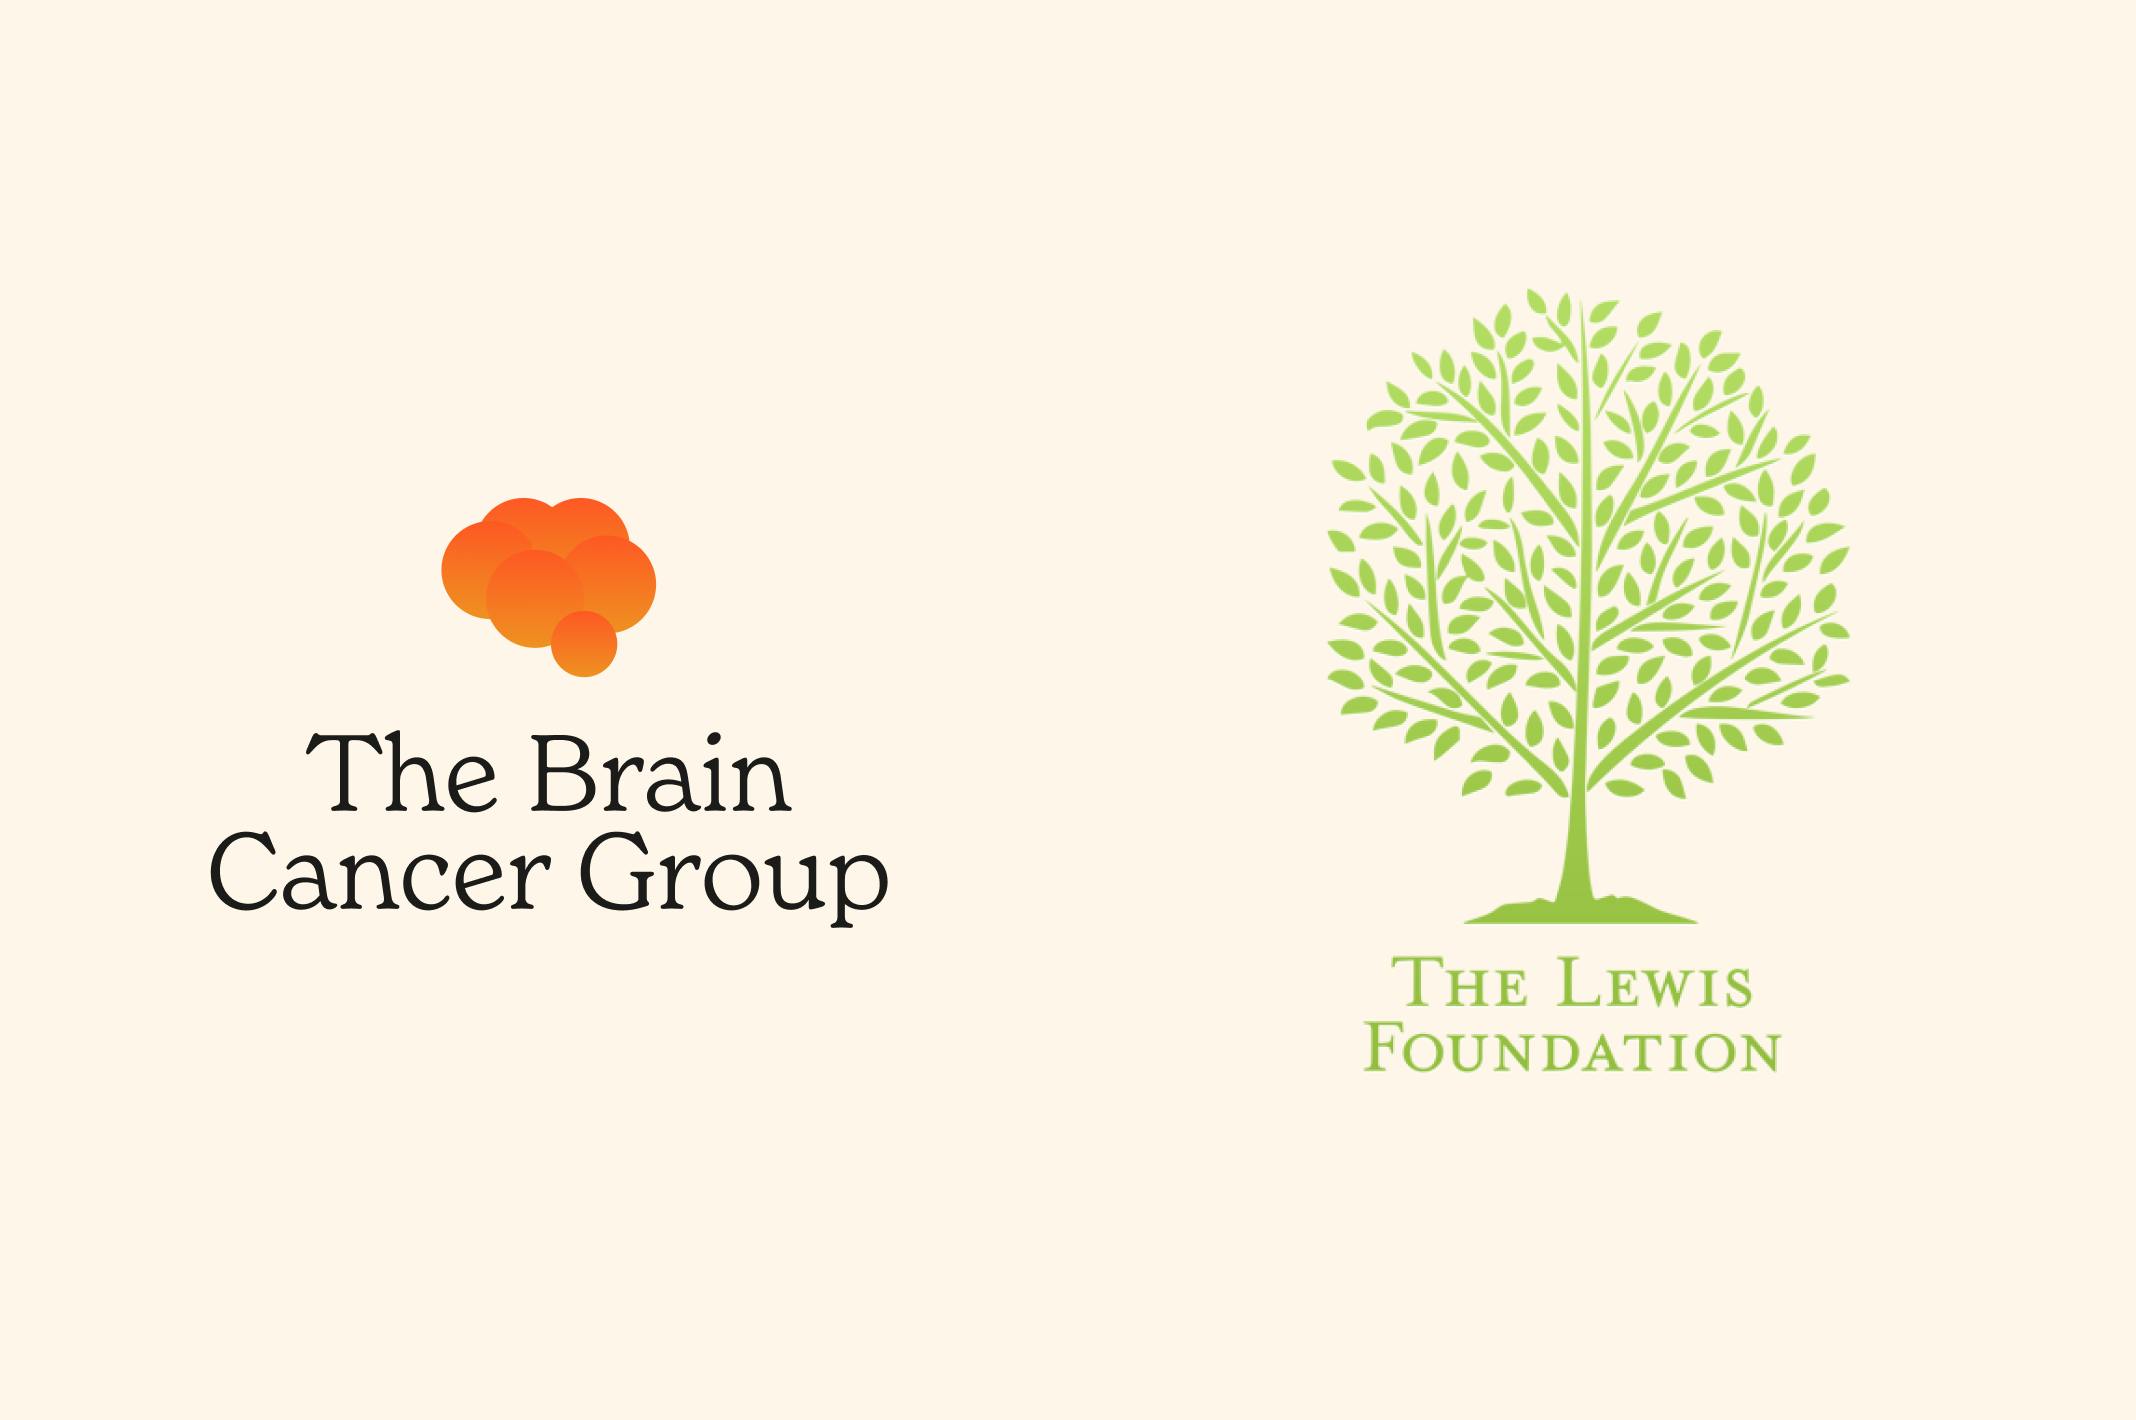 Lewis Foundation makes a real impact in brain cancer patient support.